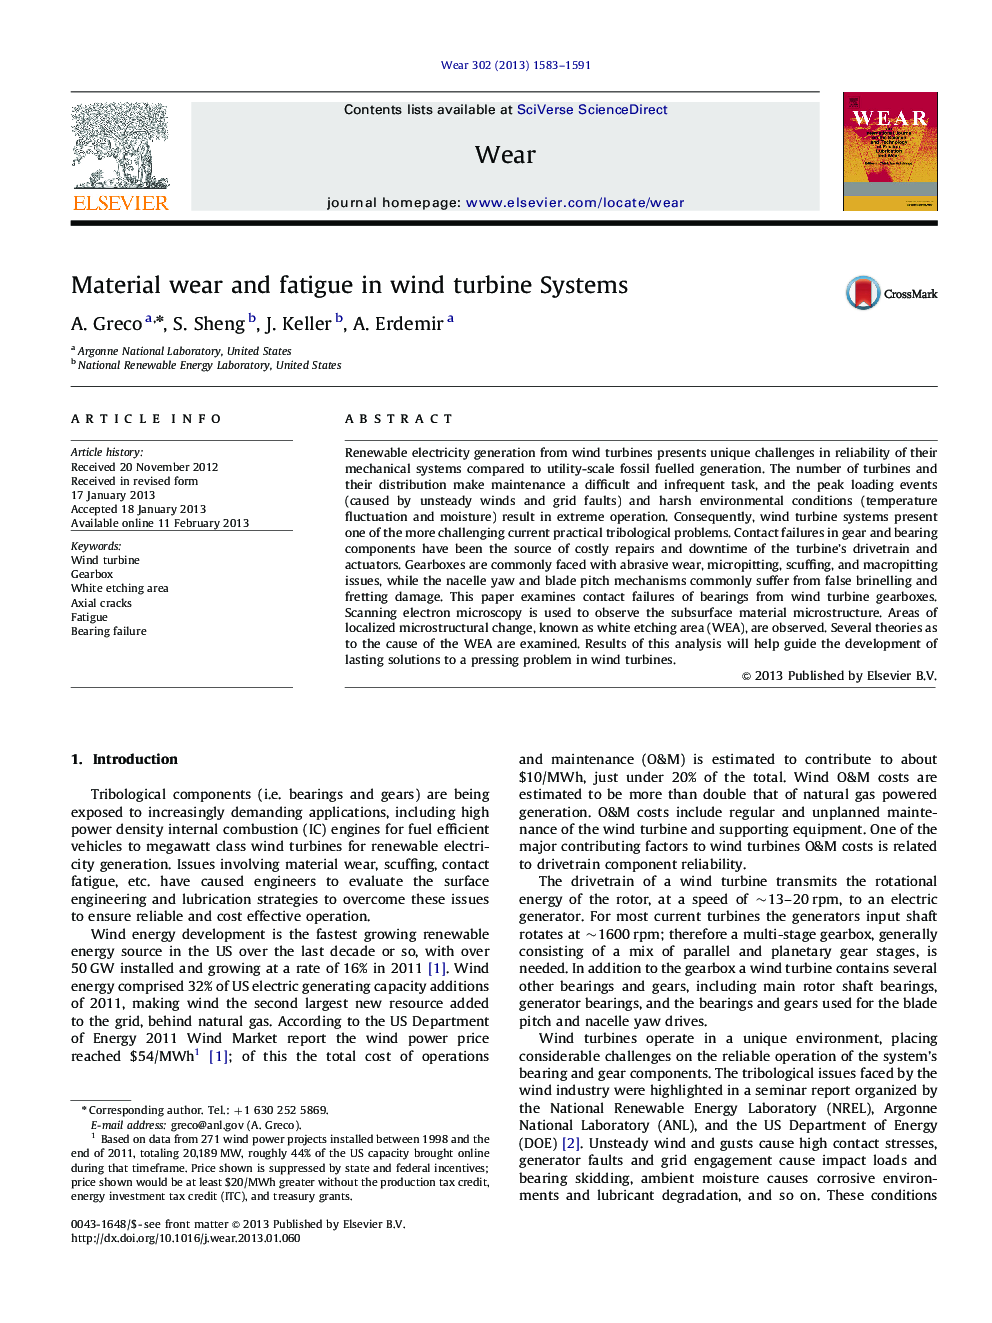 Material wear and fatigue in wind turbine Systems